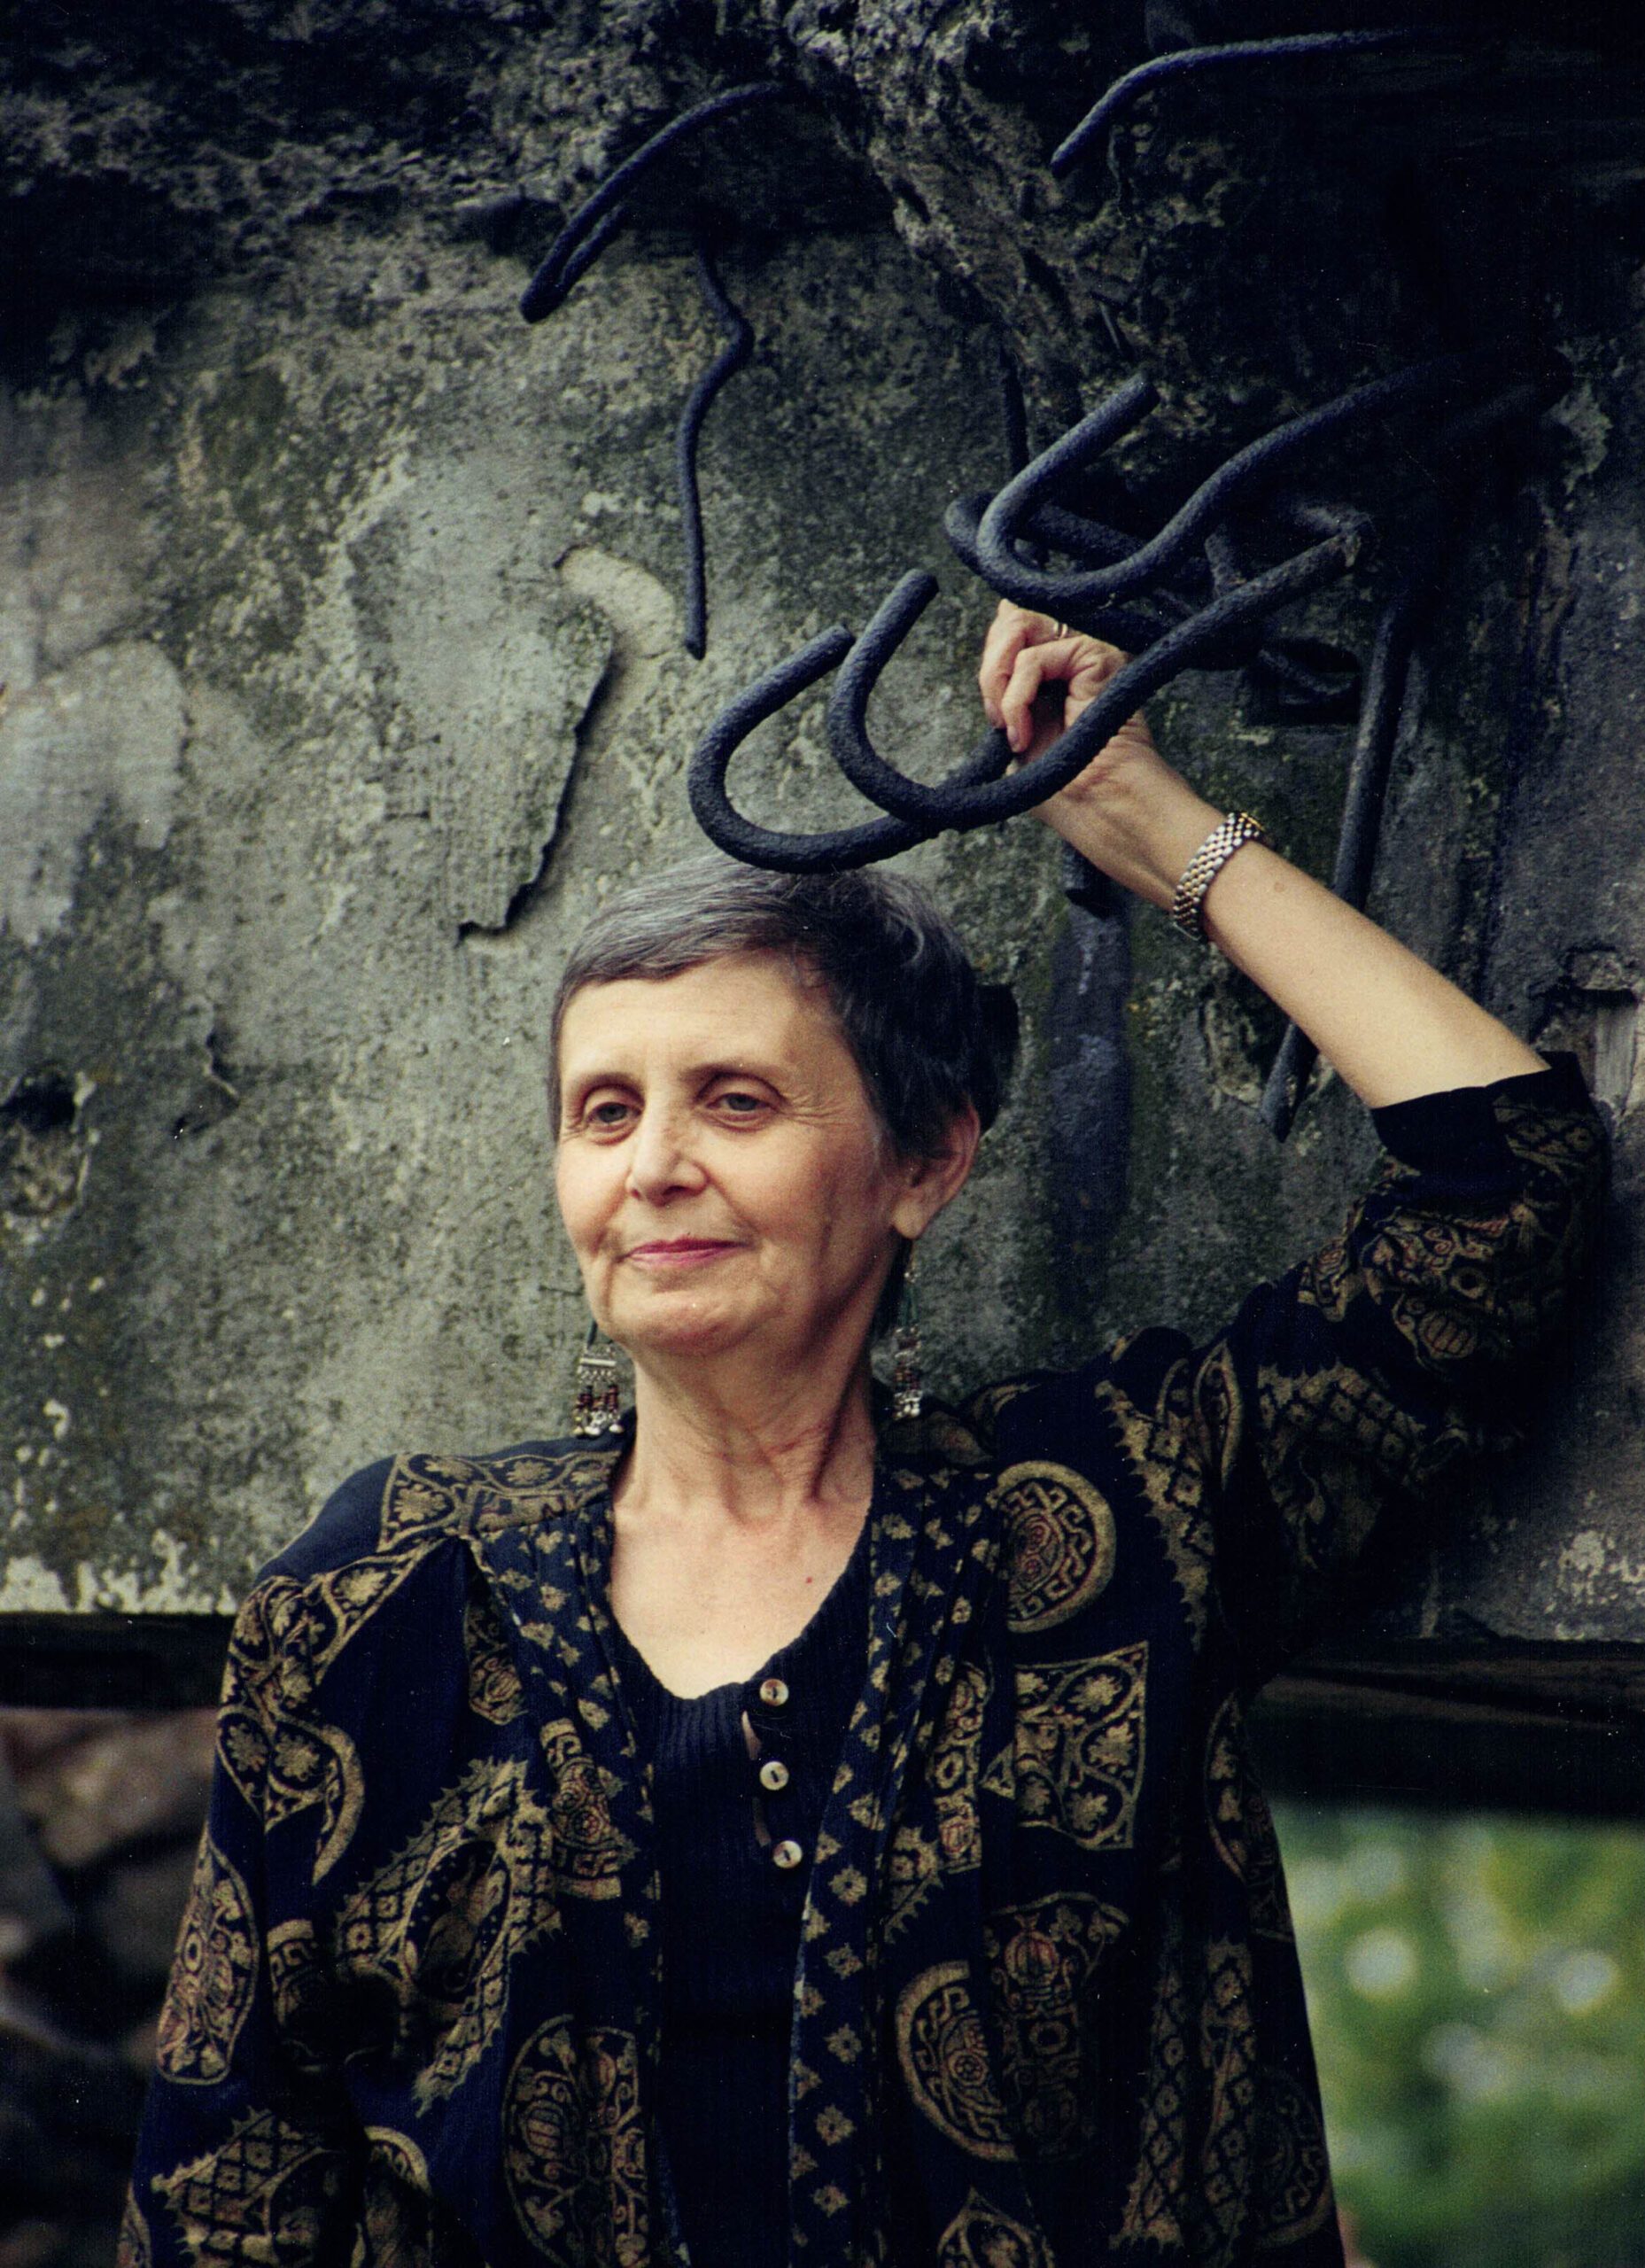 Tova standing among the remains of a gas chamber on her first return to Auschwitz in 1999.